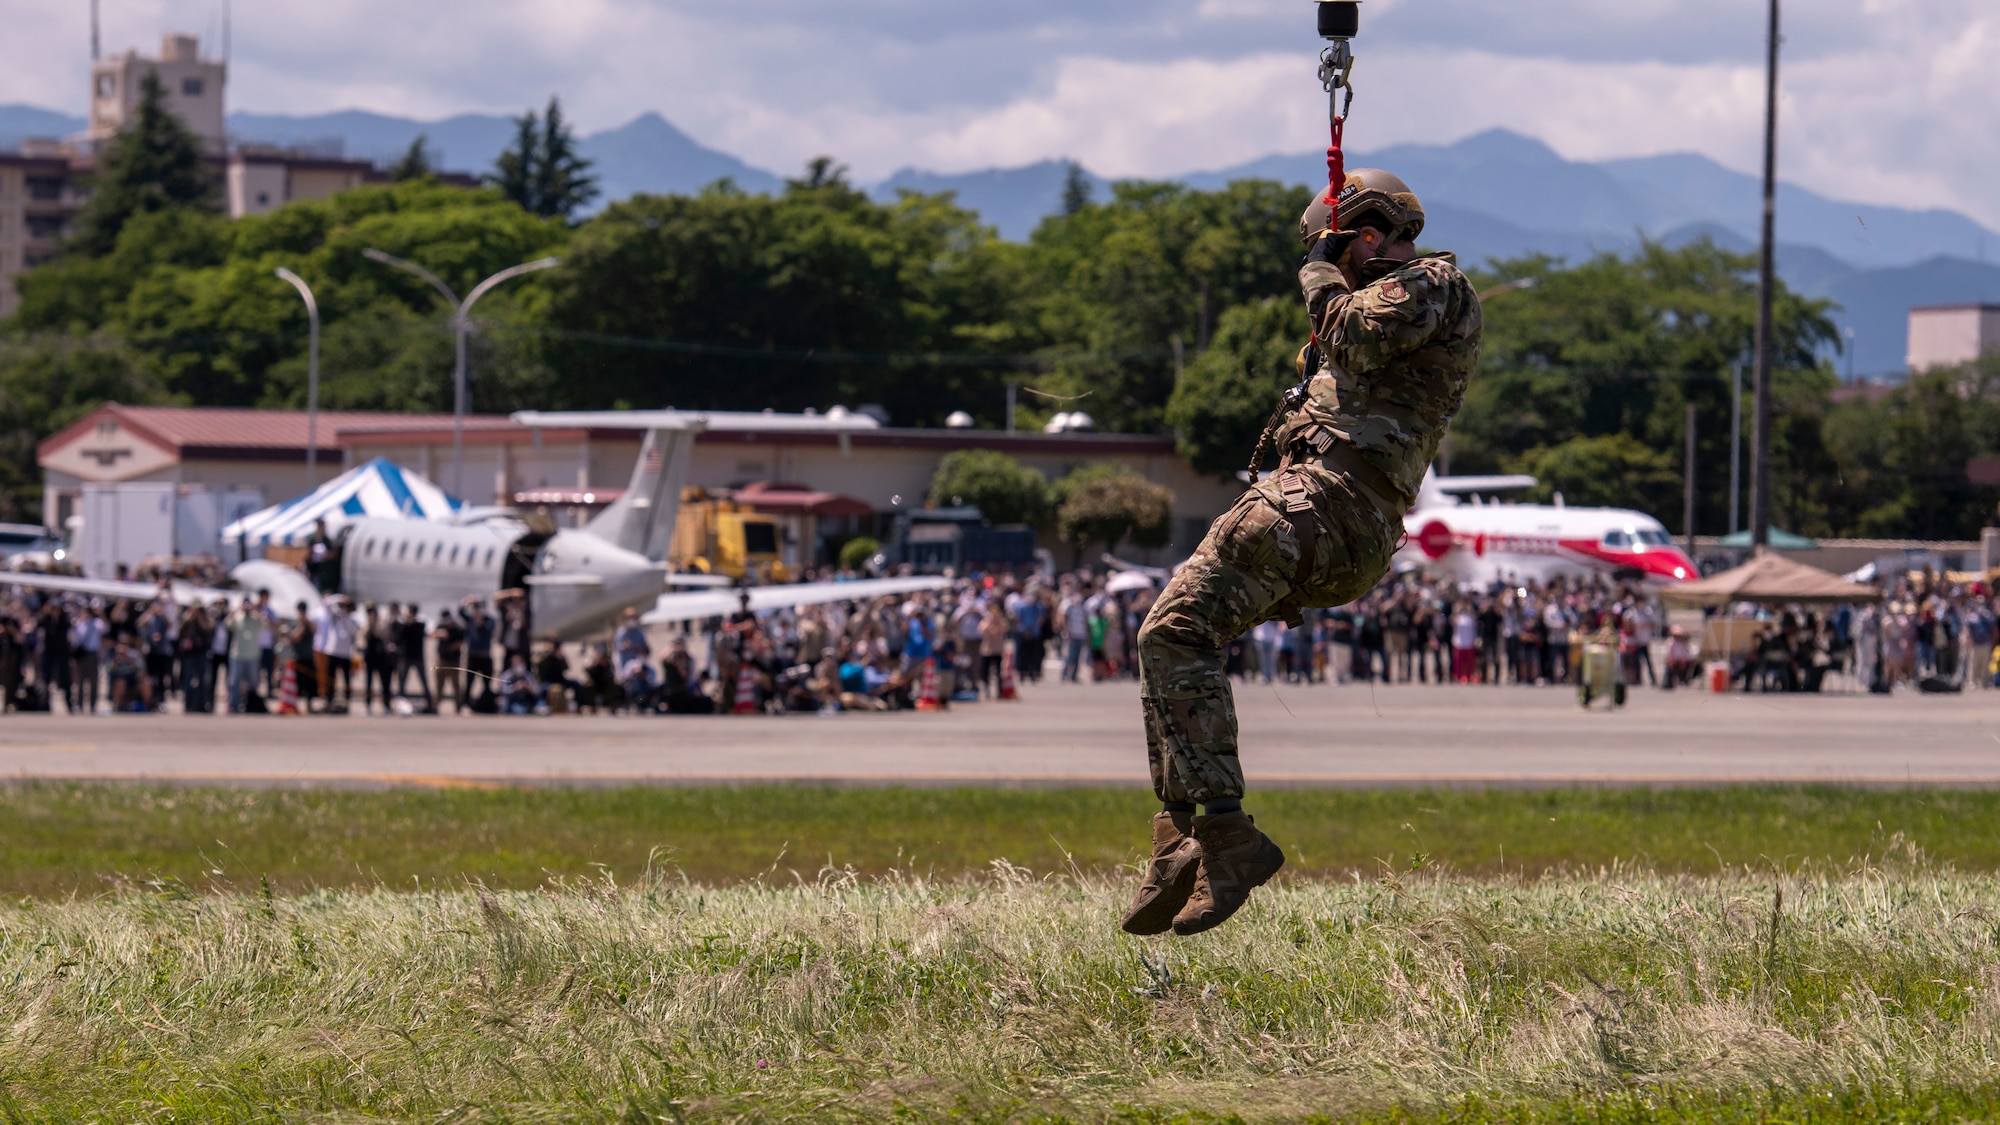 Tech. Sgt. Mark Rosenboom, 374th Operational Support Squadron Survival Evasion Resistance Escape specialist, descends to the ground during a UH-1 rescue demonstration at the Friendship Festival 2022, at Yokota Air Base, Japan, May 22, 2022. The two-day festival was an opportunity for visitors to learn more about the U.S. and Japan bilateral partnership, while strengthening the bonds between Yokota and the local communities. Yokota was able to host the event with the support of Japan Self-Defense Force, sister services and the local community. (U.S. Air Force photo by Staff Sgt. Ryan Lackey)